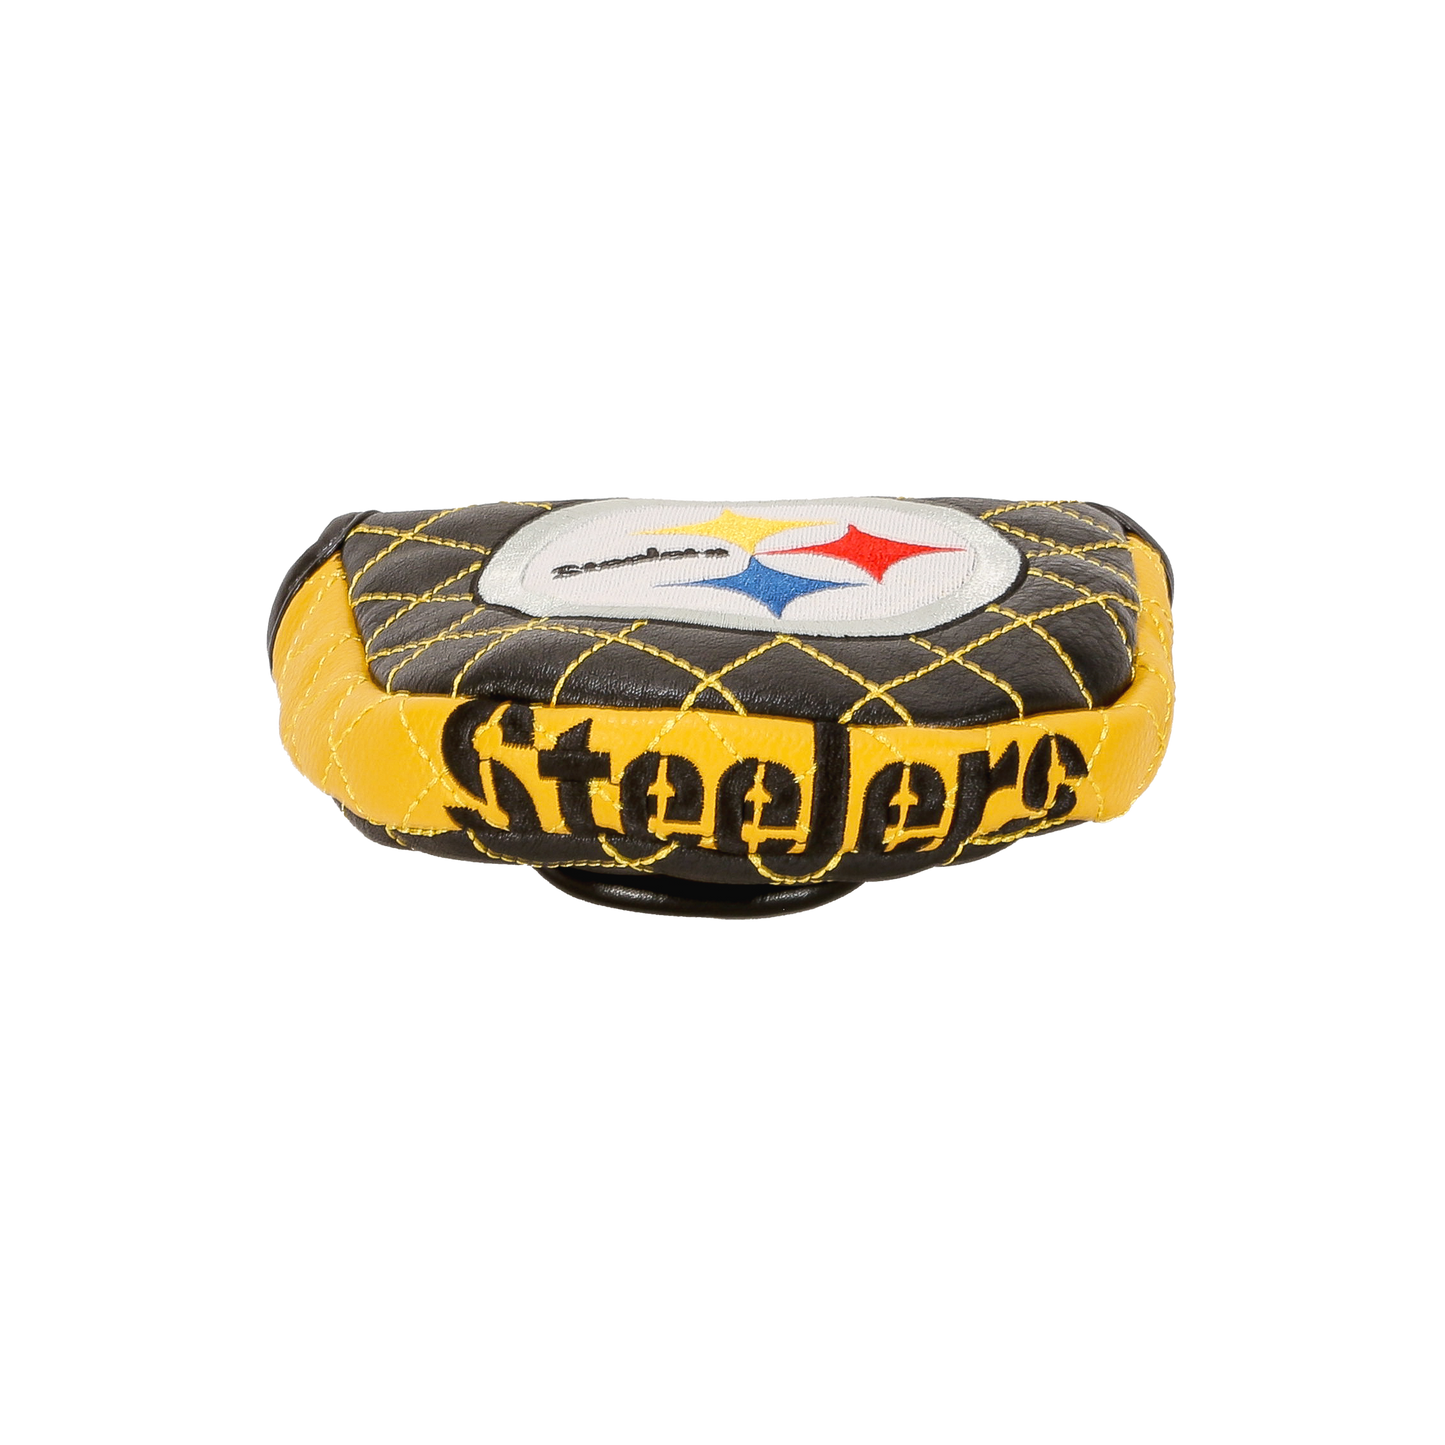 Pittsburgh "Steelers" Mallet Putter Cover